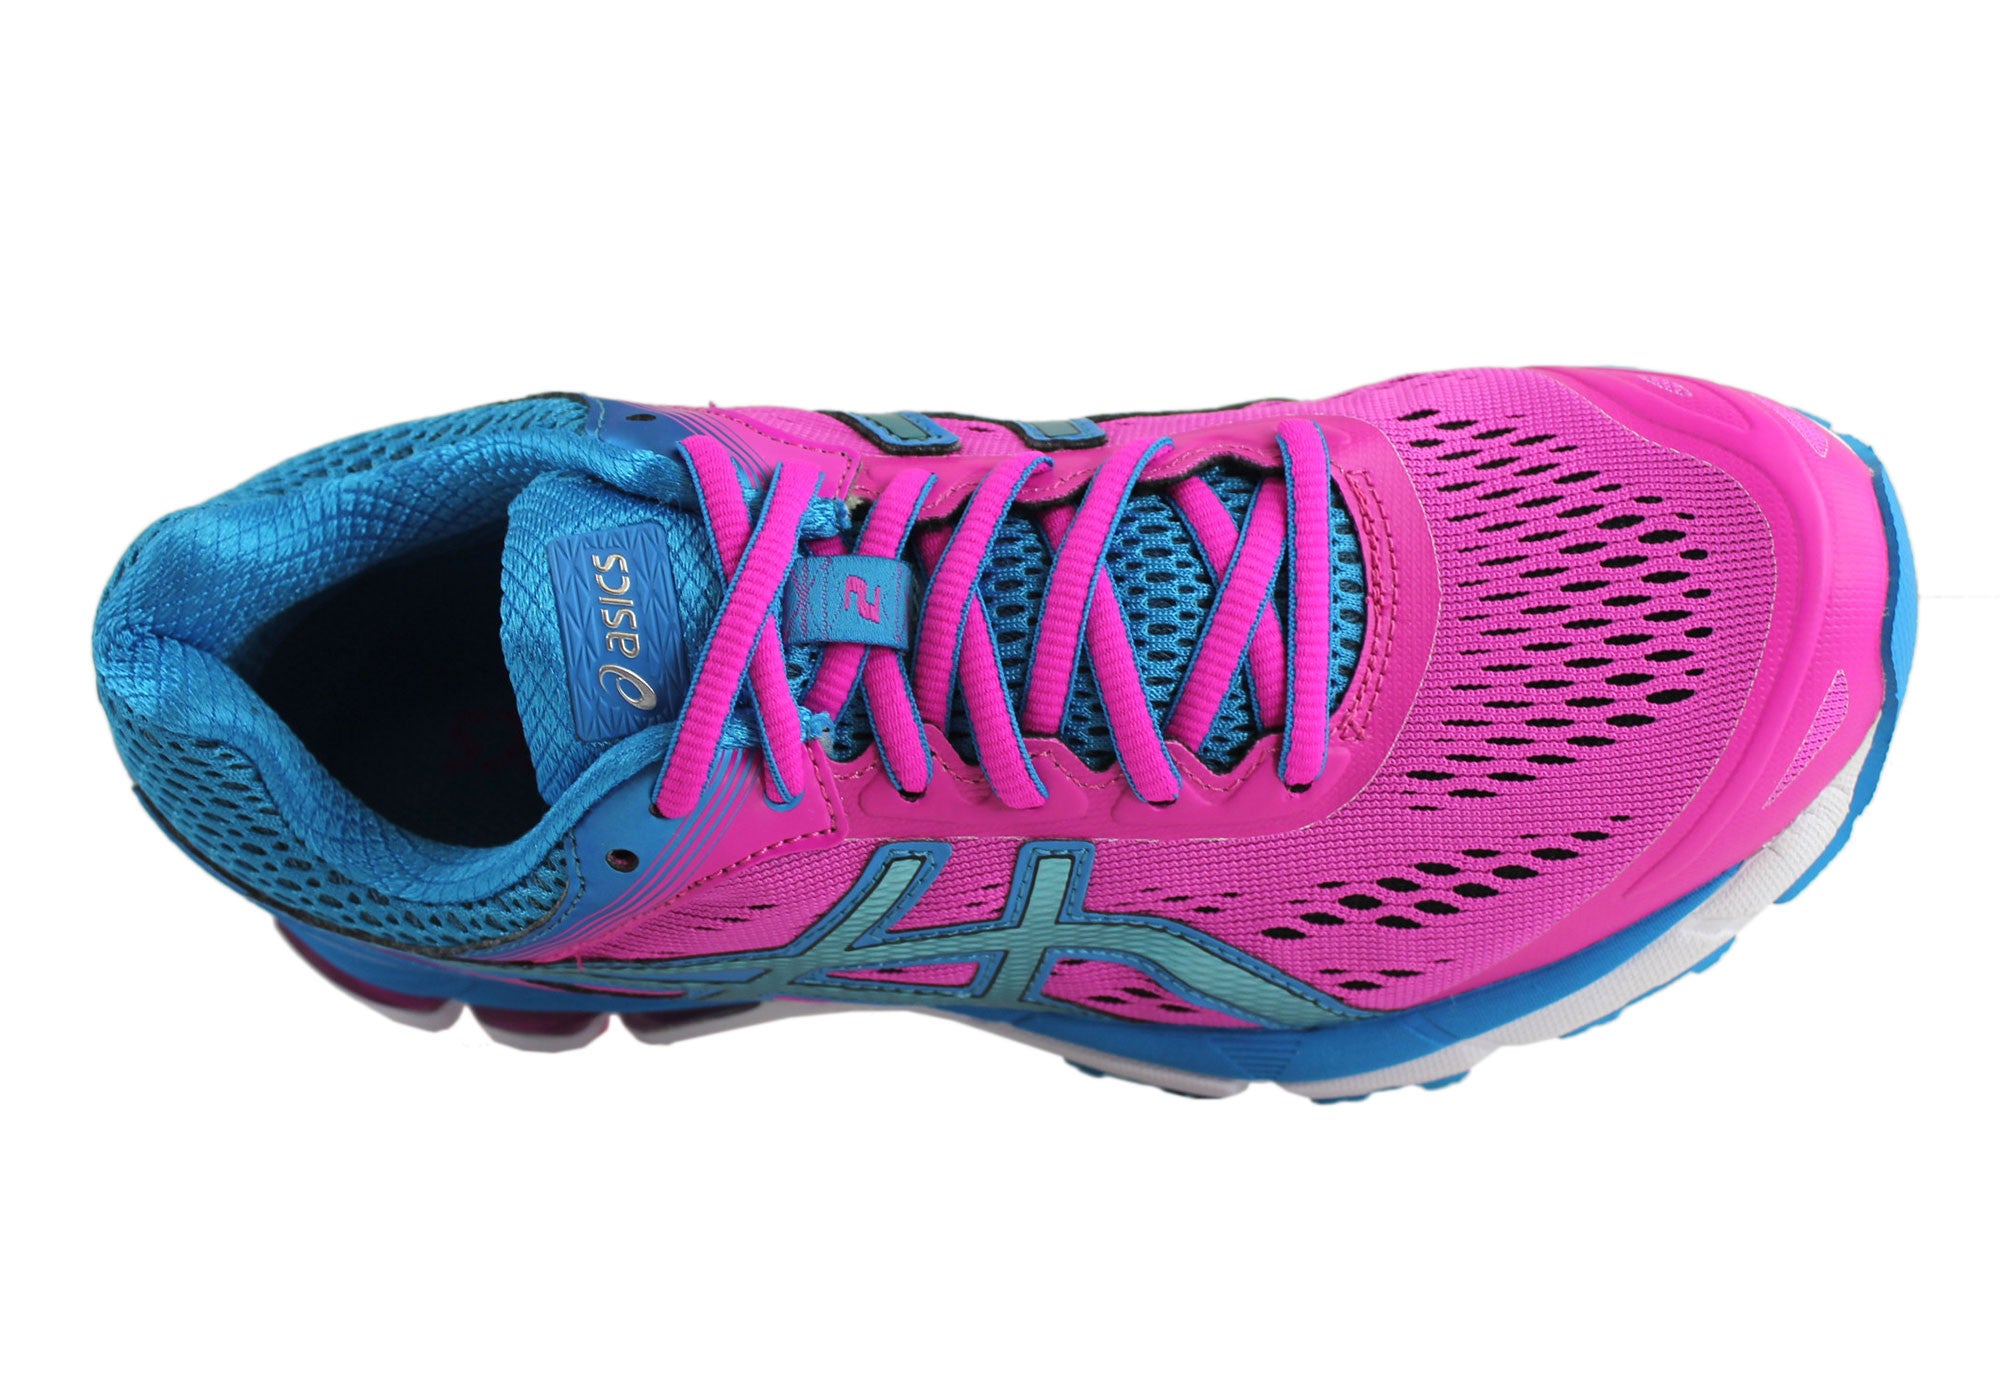 womens wide fit running shoes